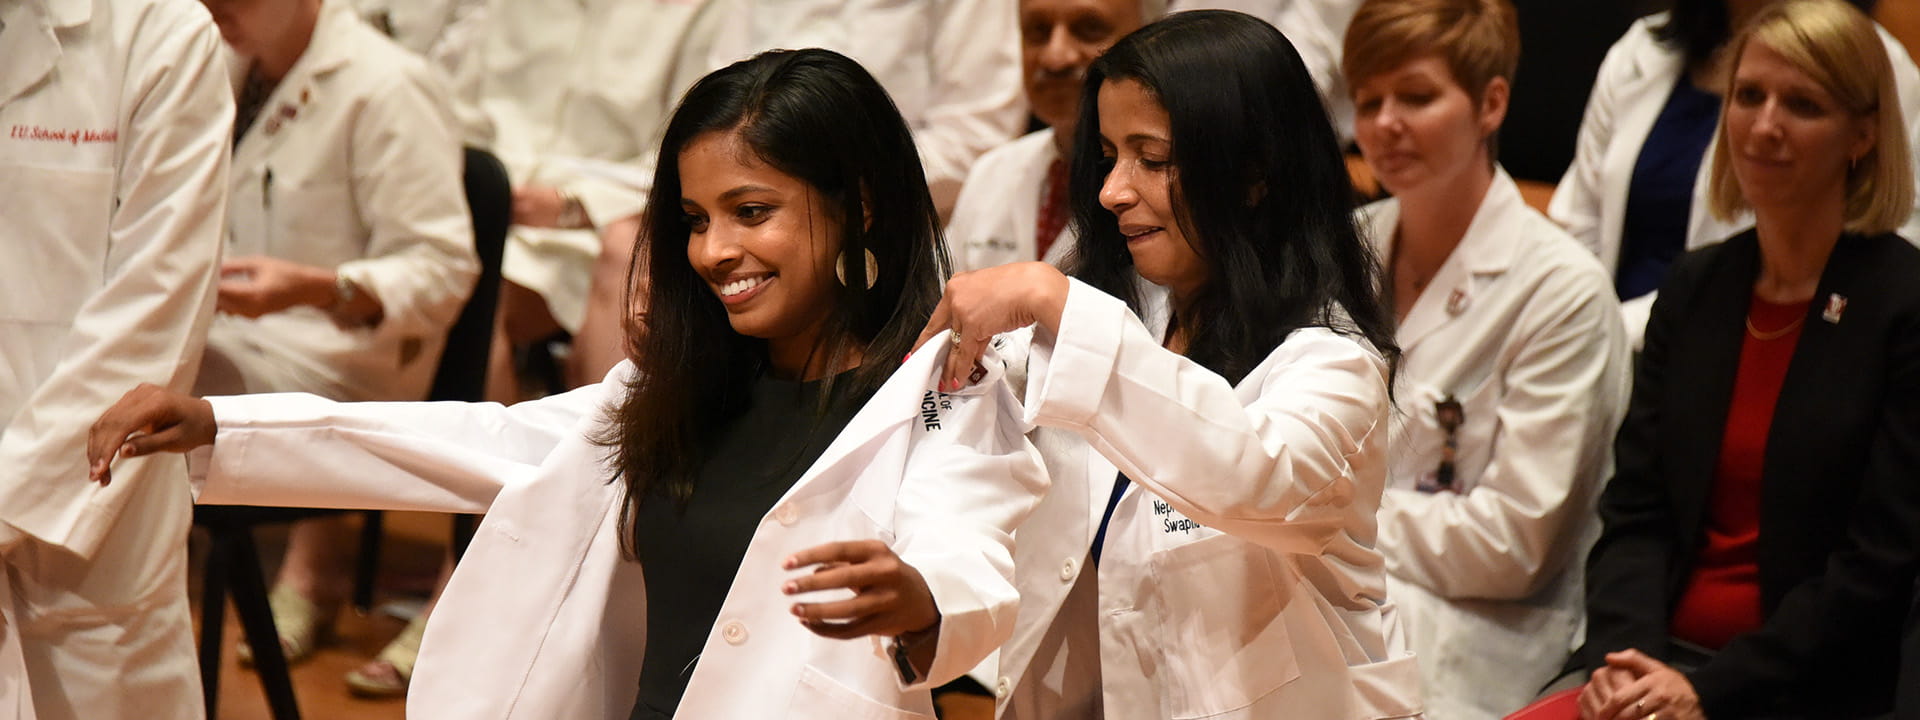 a faculty member puts a white coat on a new student